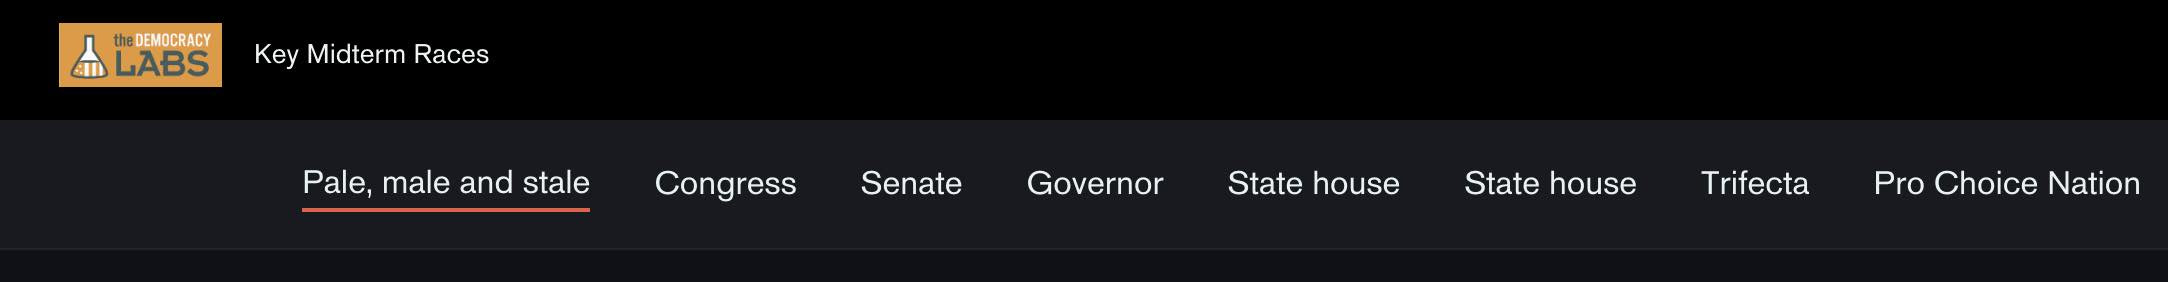 Make it easy for users to navigate the 2022 Key Midterm Races with a navigation bar